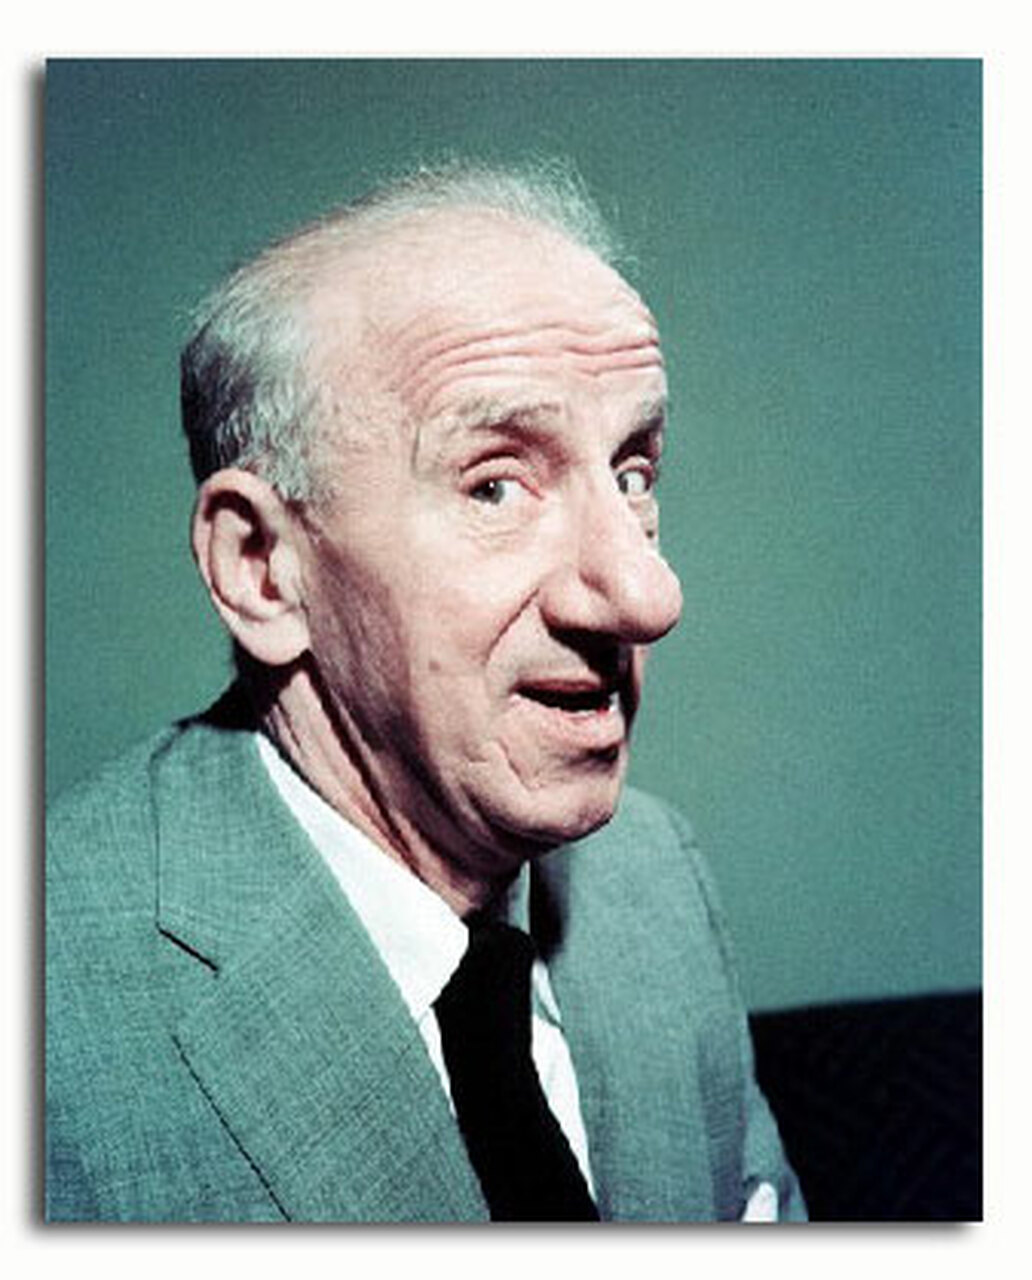 ss3125616_-_photograph_of_jimmy_durante_available_in_4_sizes_framed_or_unframed_buy_now_at_starstills__44417__26206.1394493985.jpg